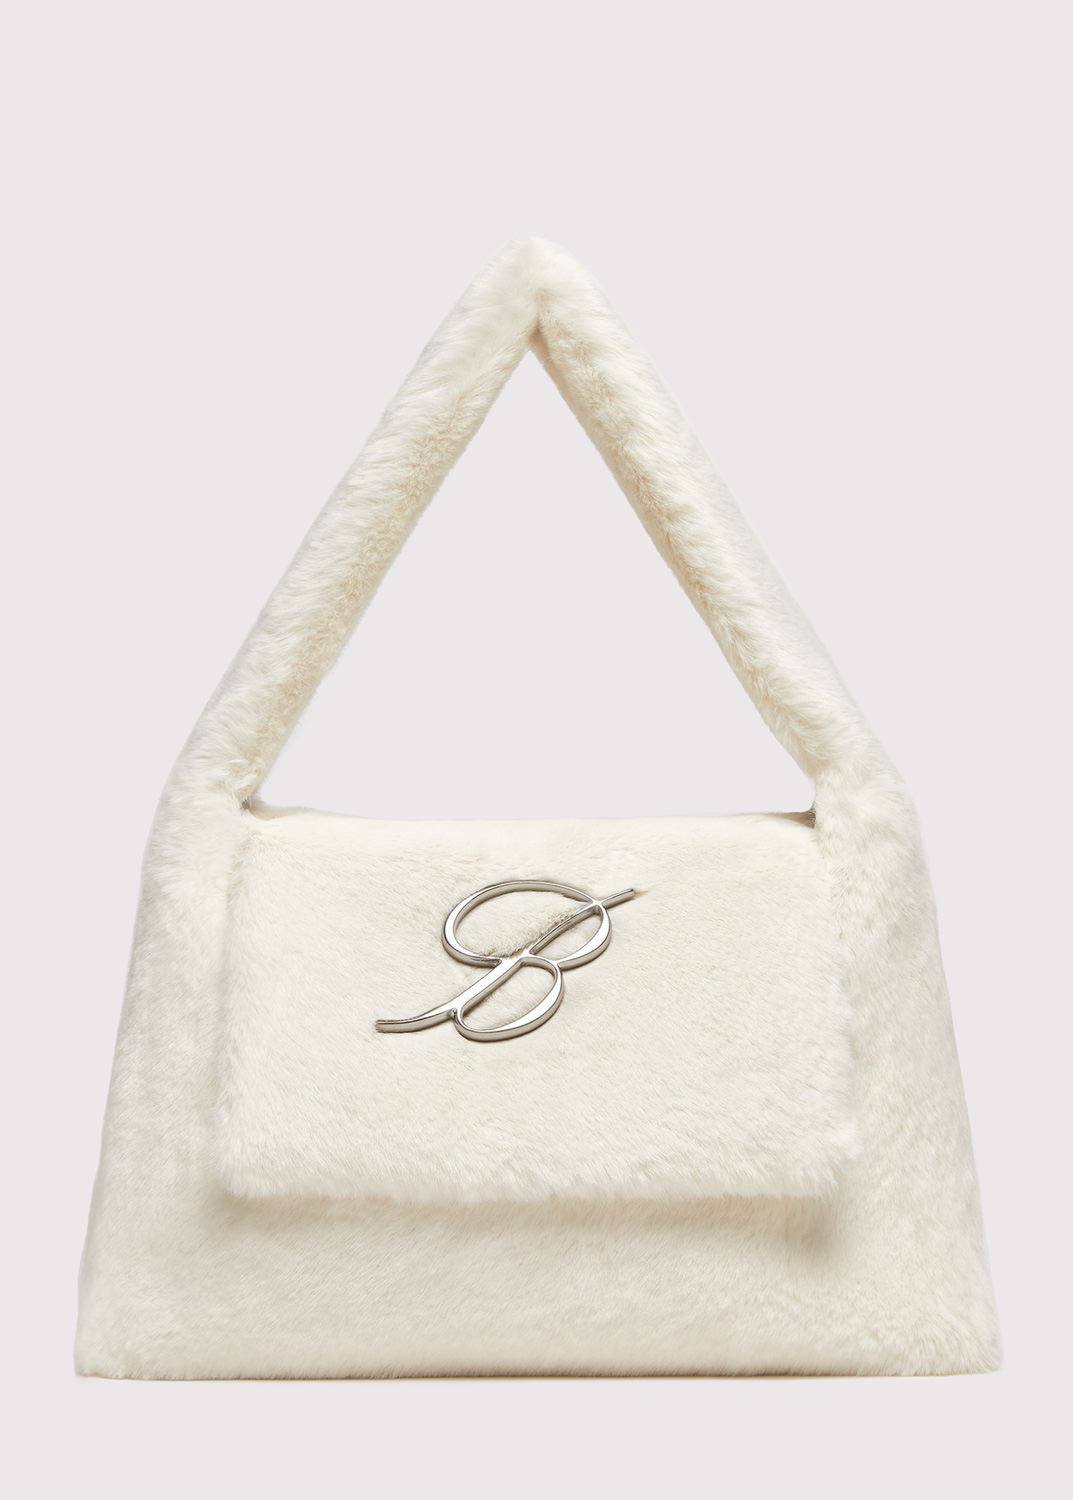 BLUMARINE: LARGE-SIZE FAUX FUR BAG WITH FLAP AND LOGO